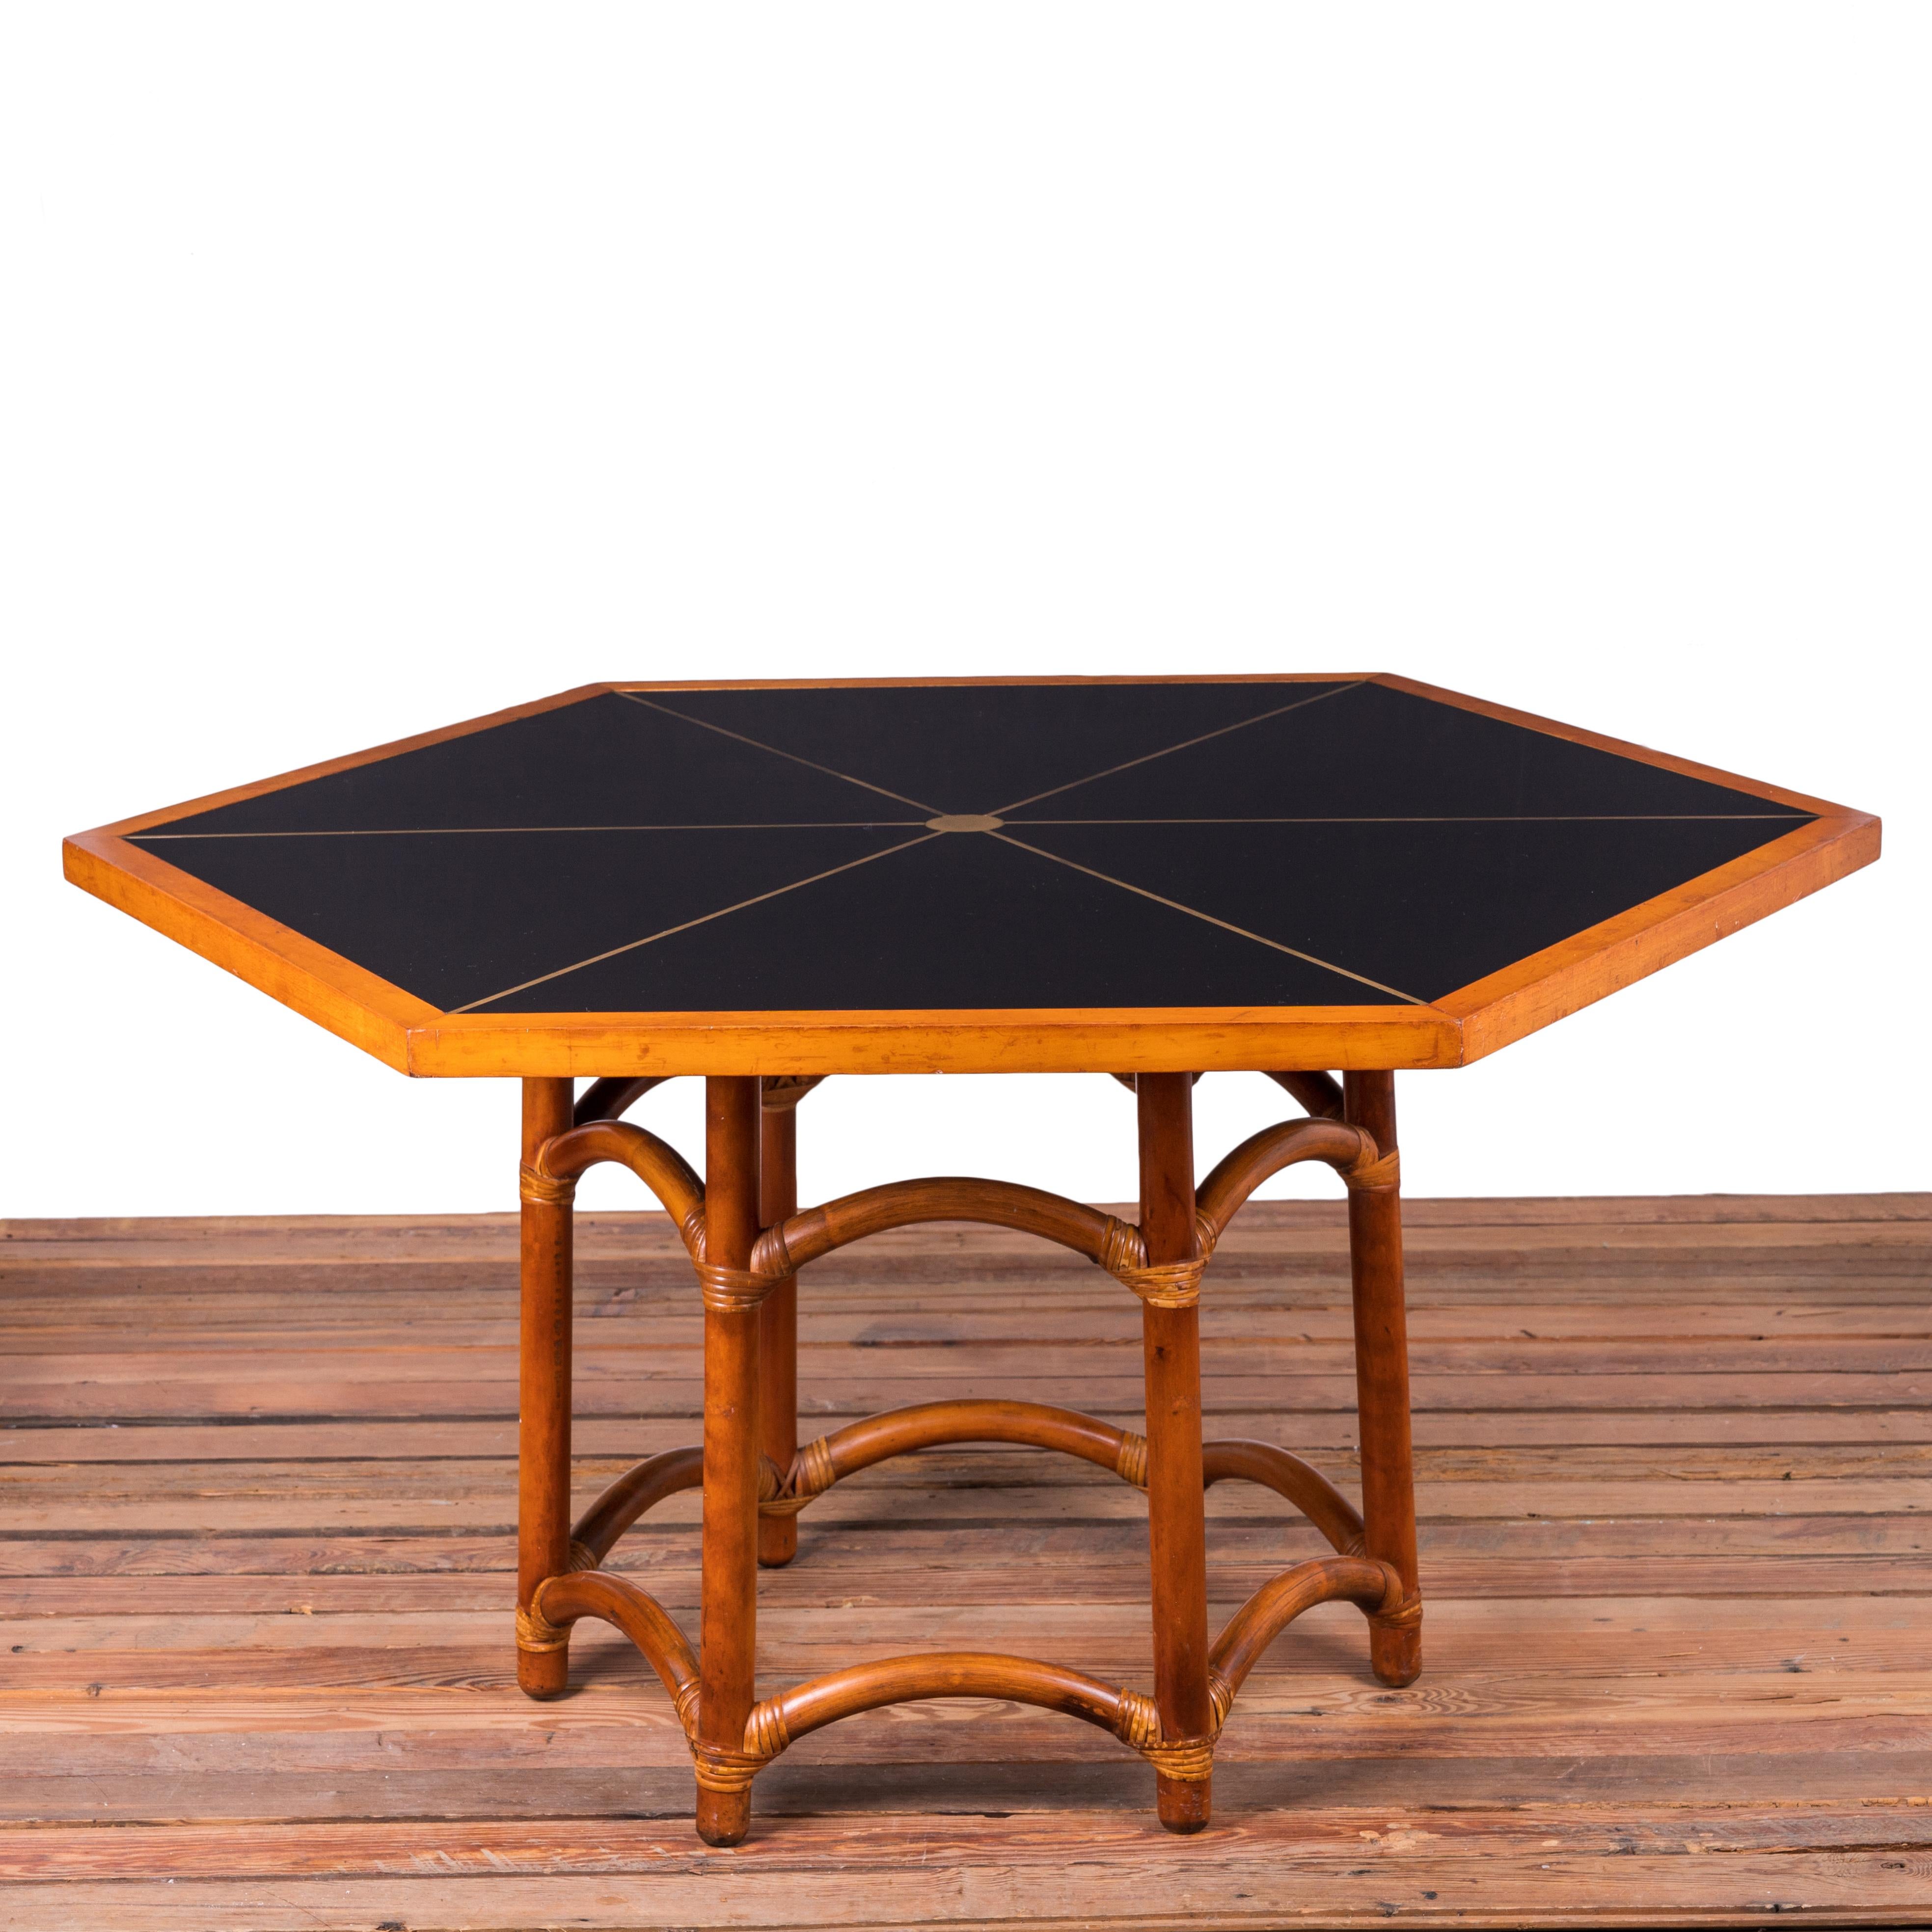 A hexagonal game table designed by Tommi Parzinger for Willow & Reed, Inc., circa 1955.  

Black formica top with inlaid brass in hexagonal maple frame over a wrapped rattan base.

Top measures 44 inches wide by 51 inches at the widest point.  

26